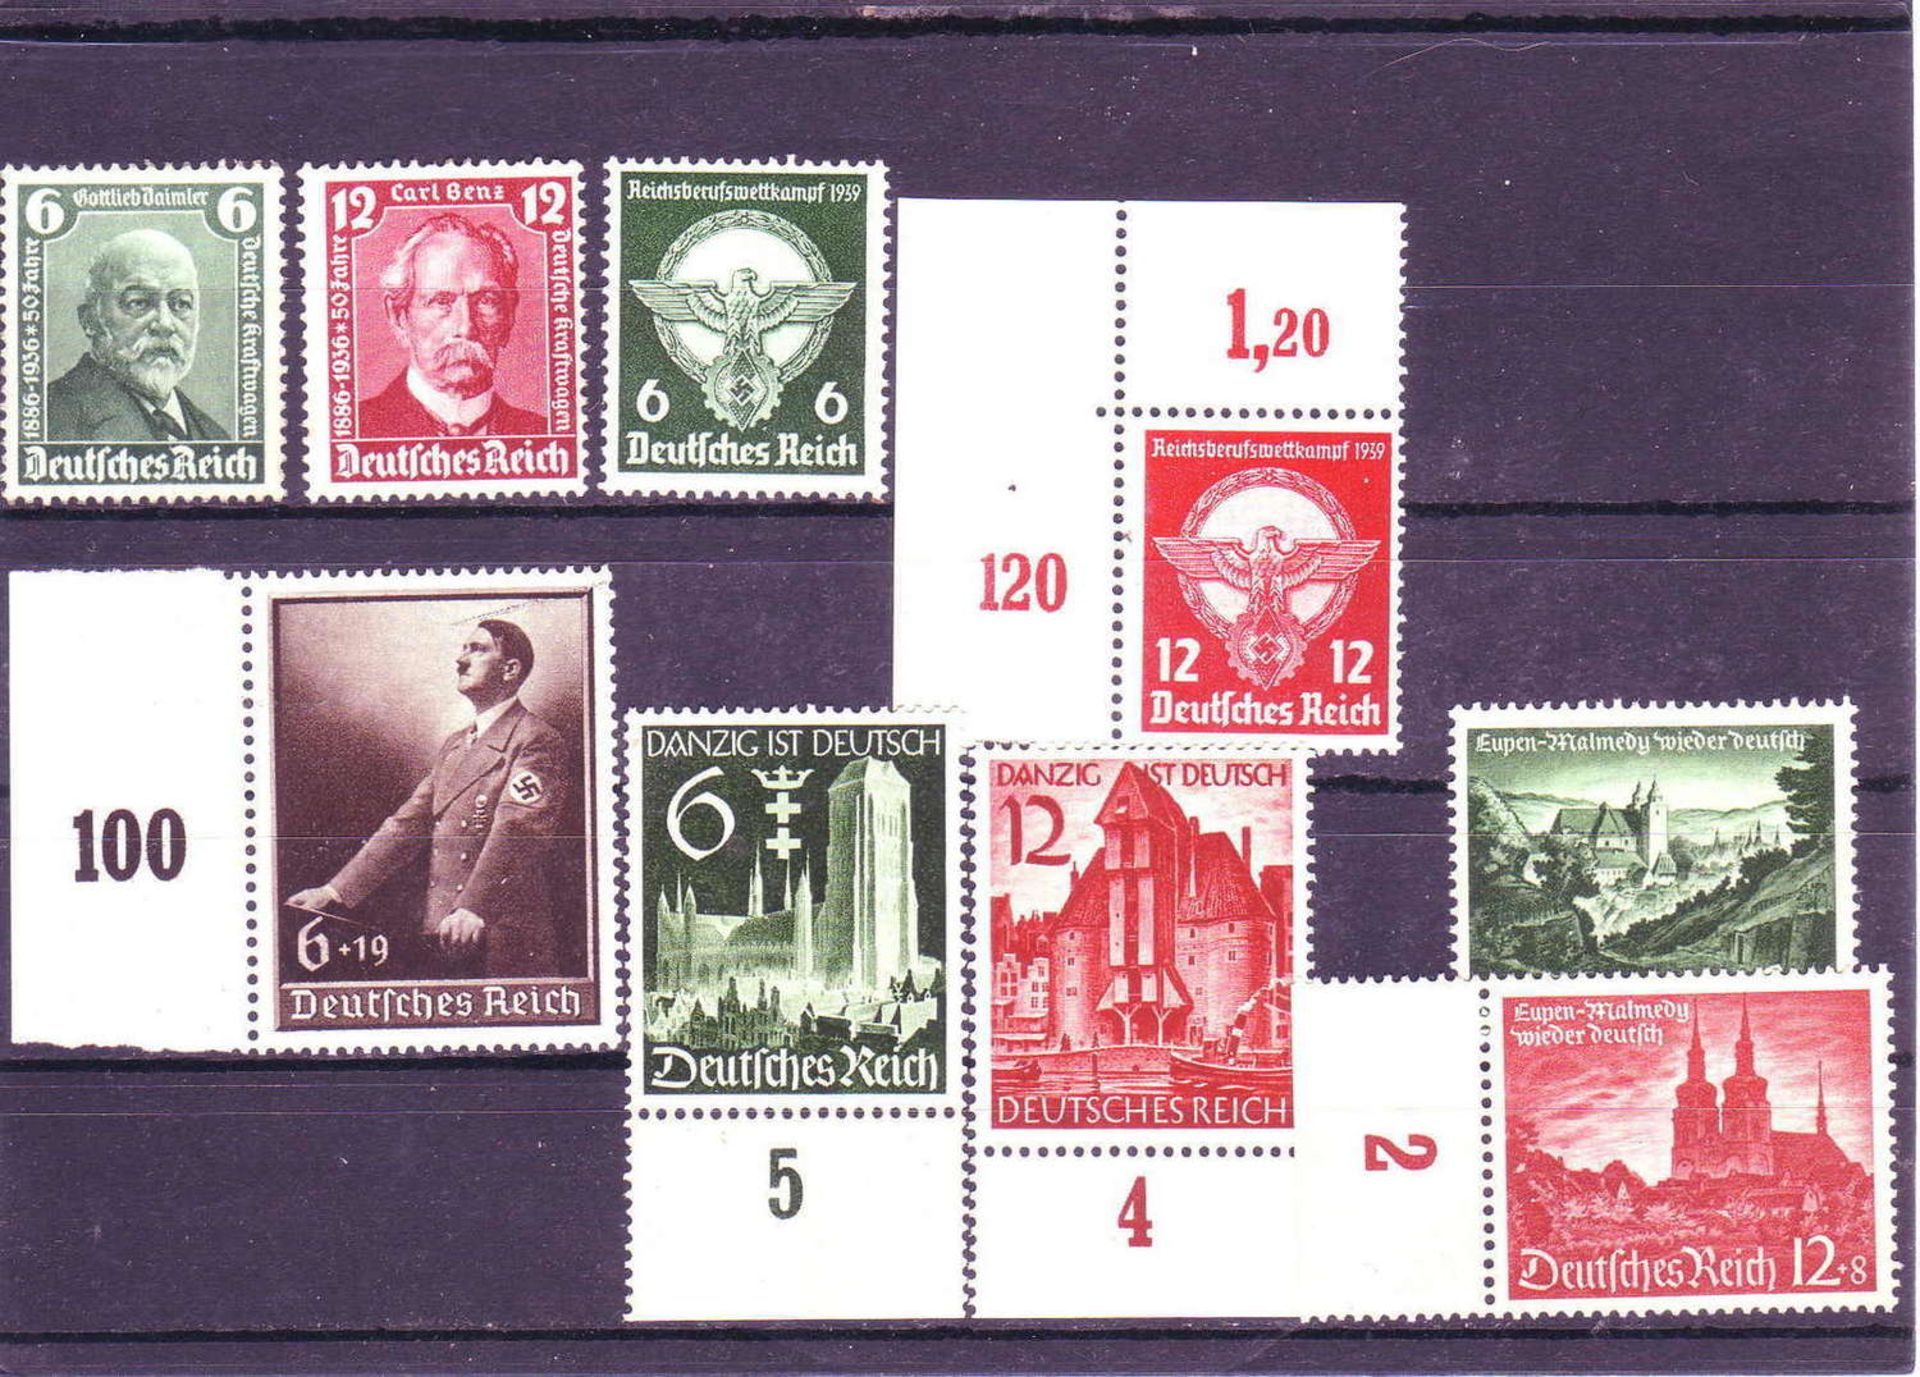 German Reich, Michel - no. 604/05, 689/90, 701, 714/75, 748/49, 714715. All mint never hinged.